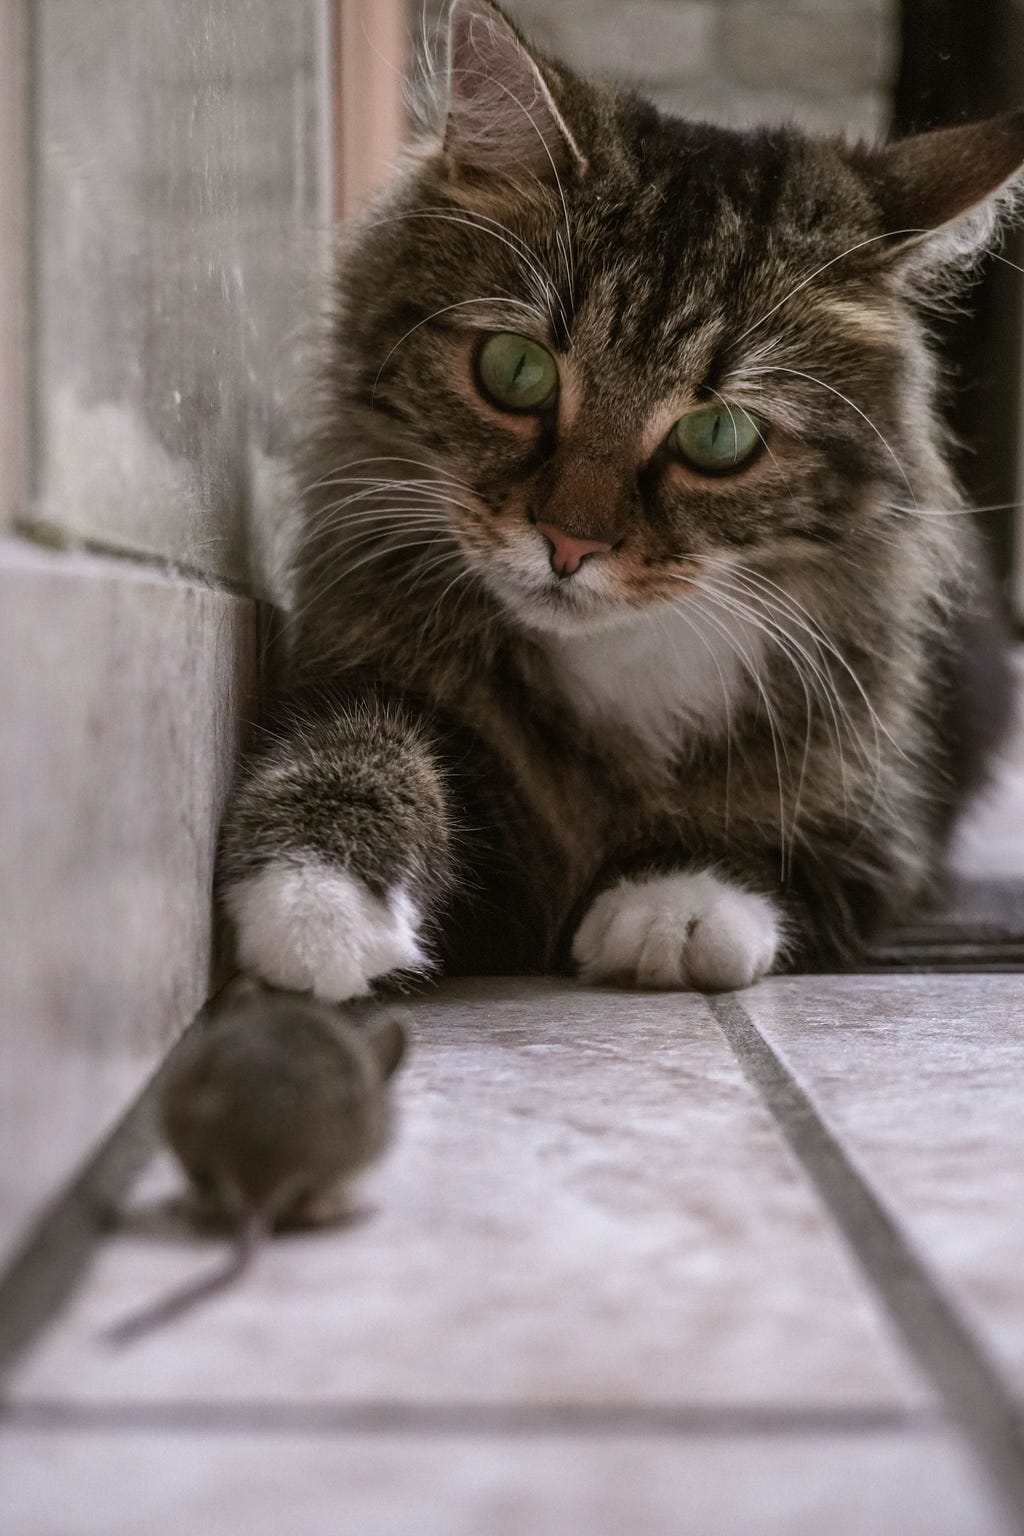 Medium-haired tabby with white paws reaching towards a mouse